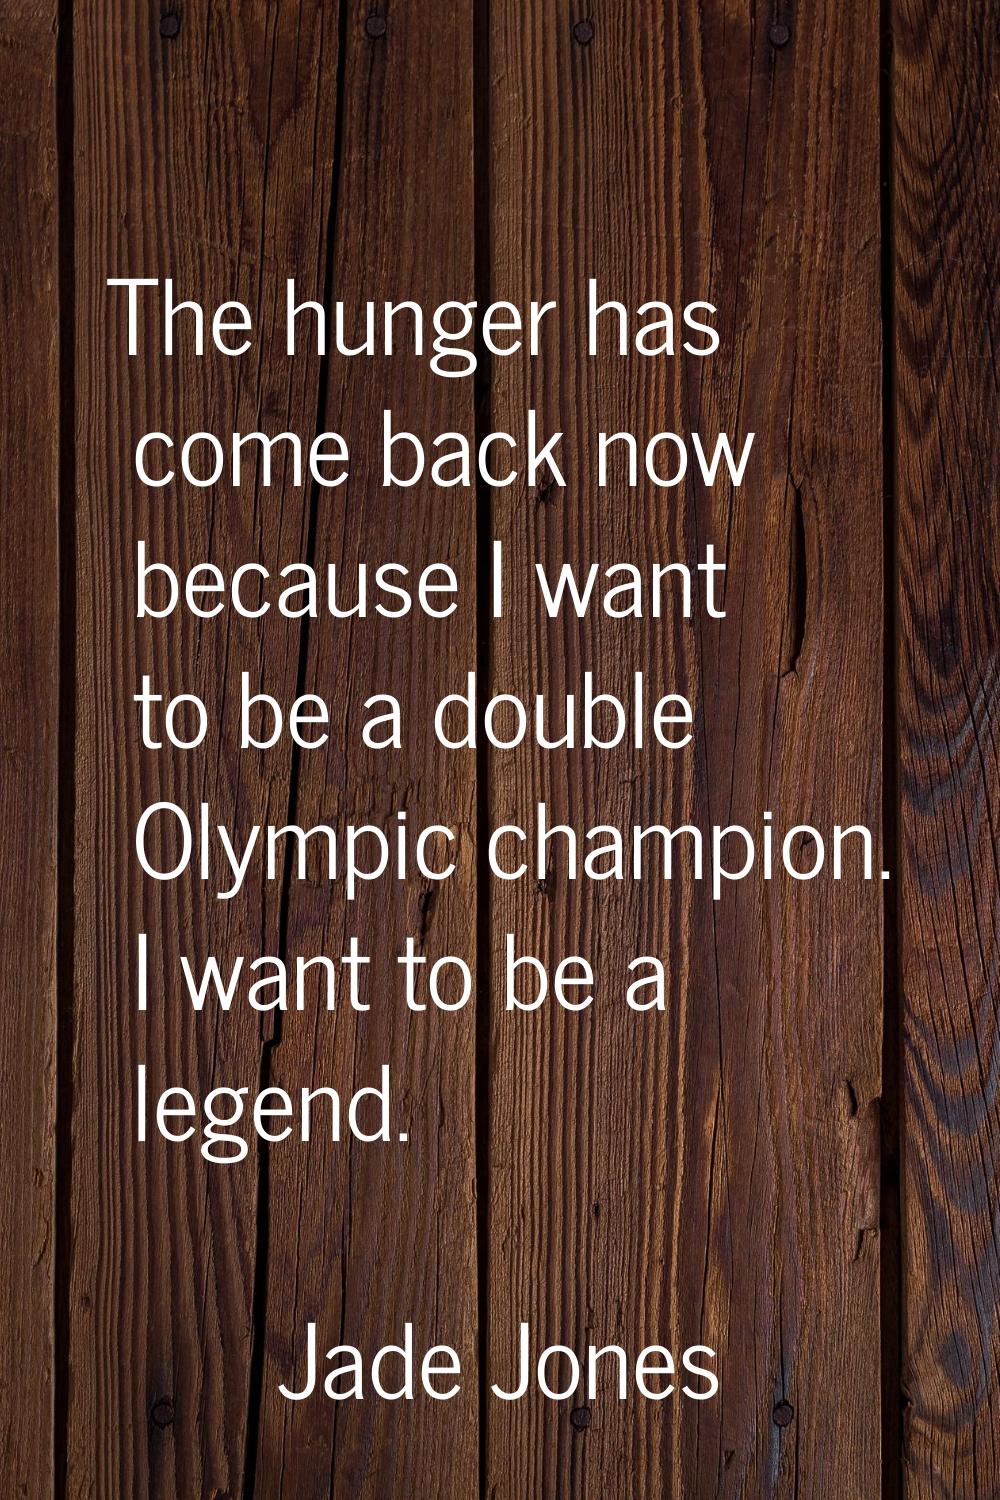 The hunger has come back now because I want to be a double Olympic champion. I want to be a legend.